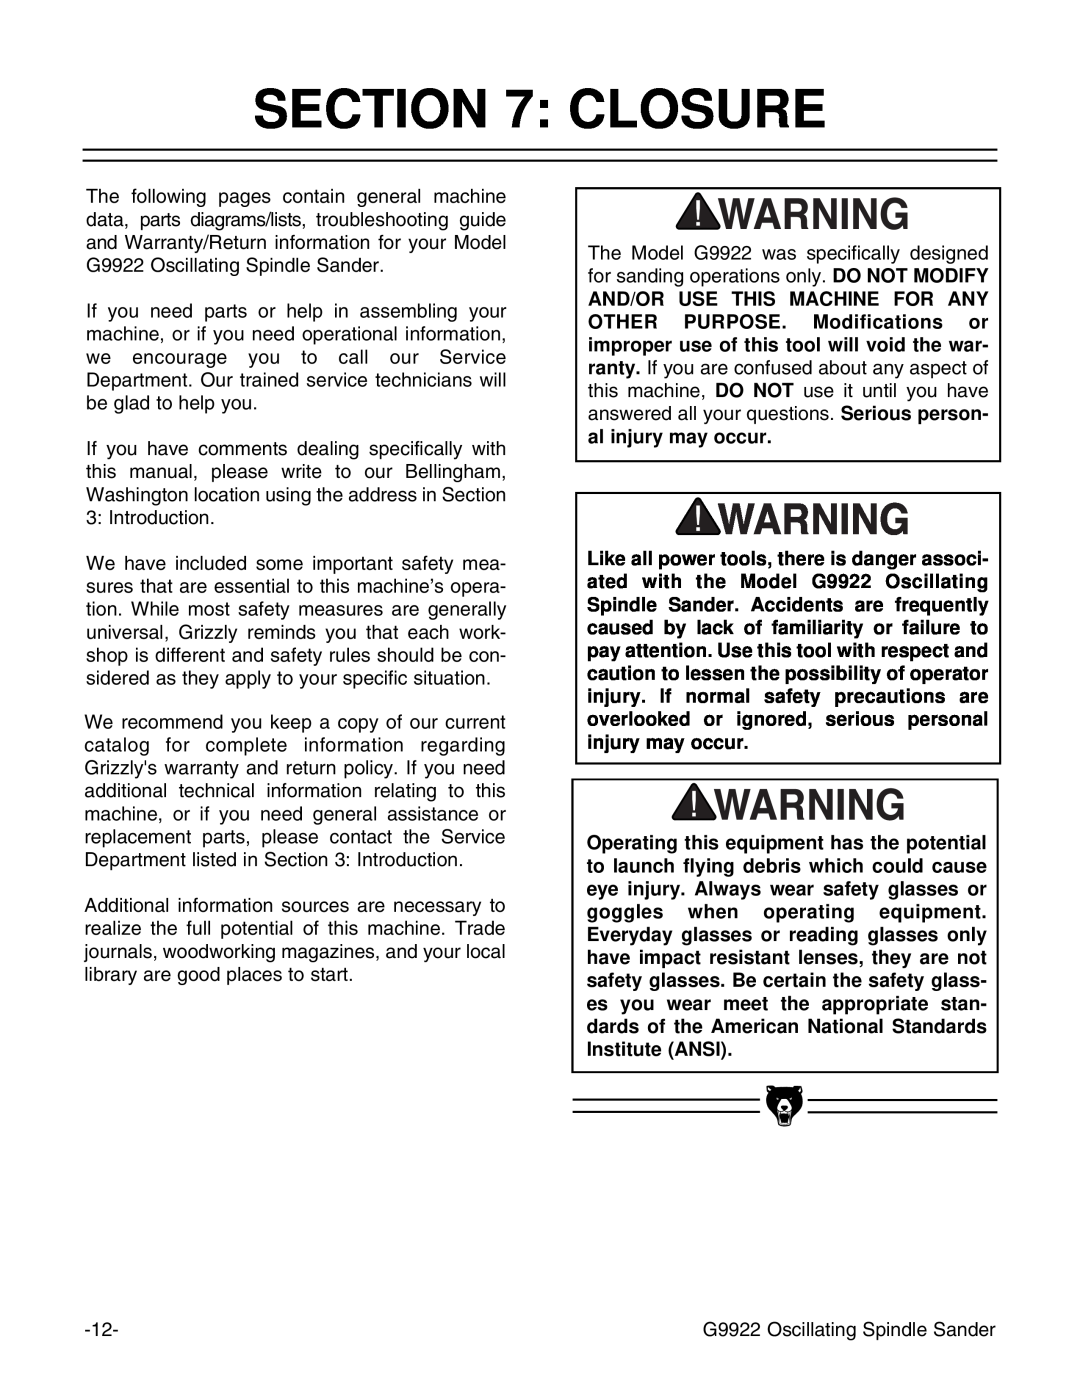 Grizzly G9922 instruction manual Closure 